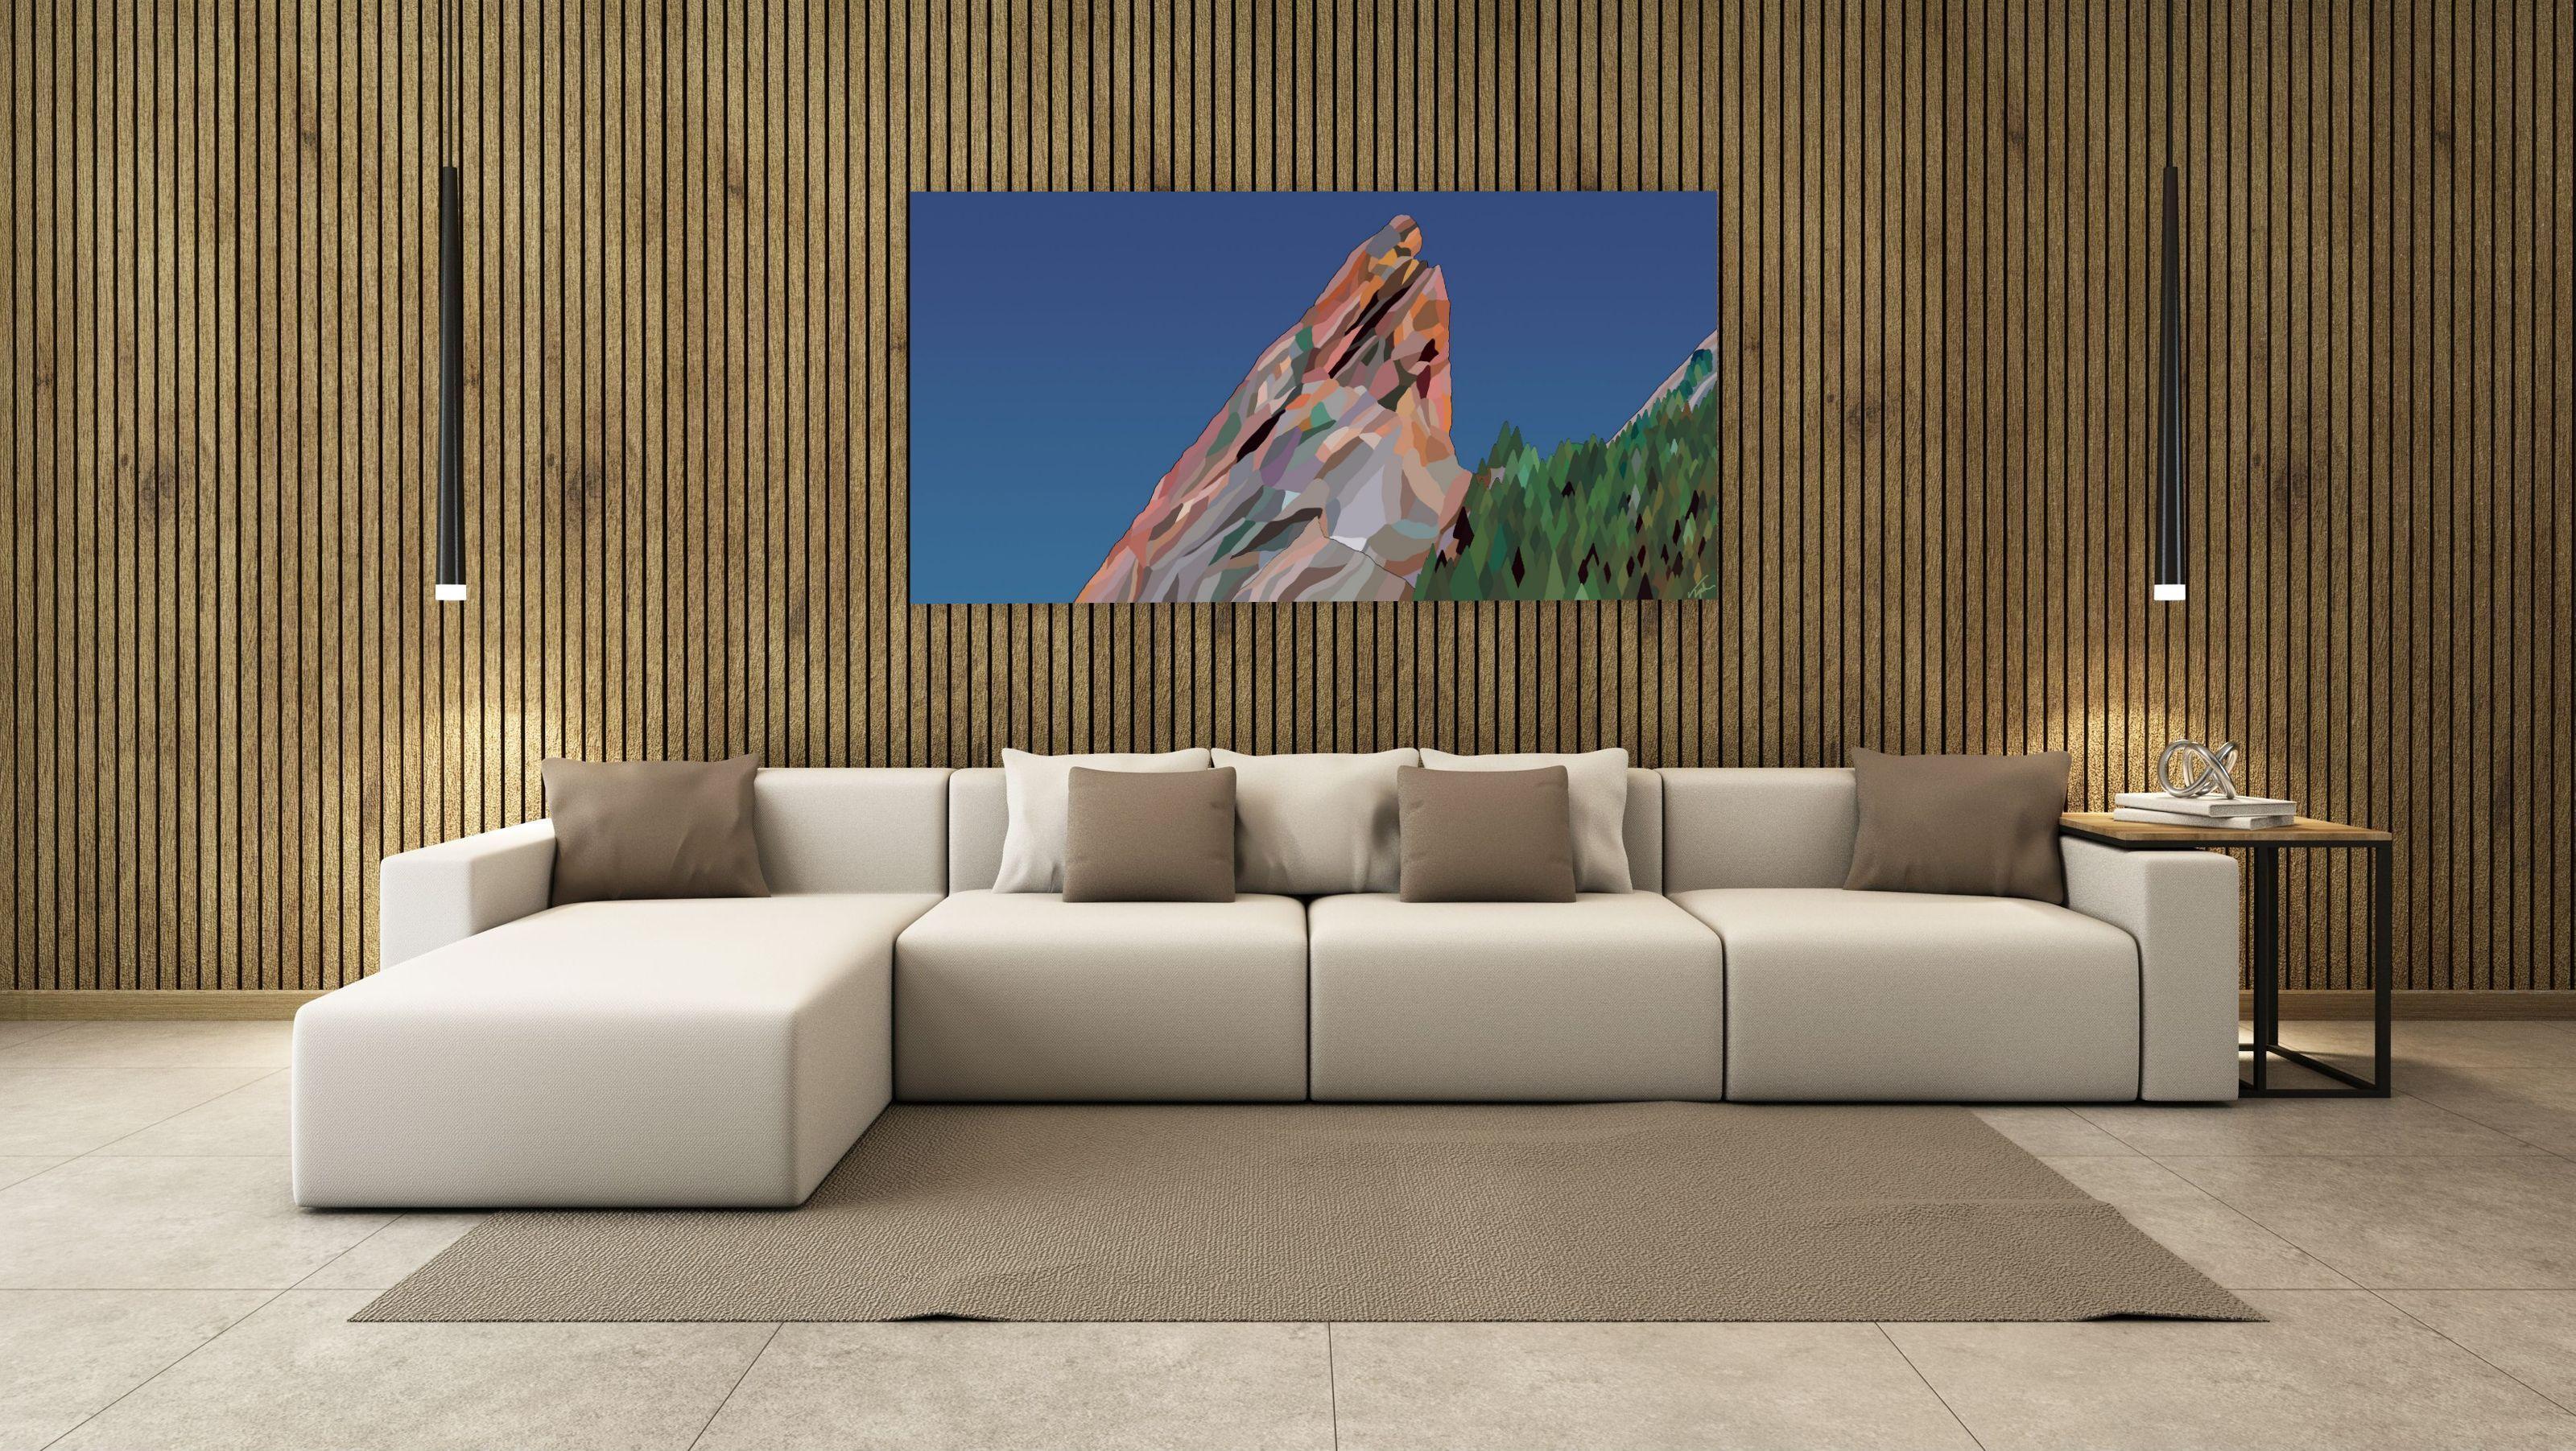 This original modern landscape painting titled, Colorado Gem, is a bold vivid work of contemporary art. The original large-scale digital painting, dye-sublimated onto aluminum by Coloradan artist Topher Straus, takes an original approach to